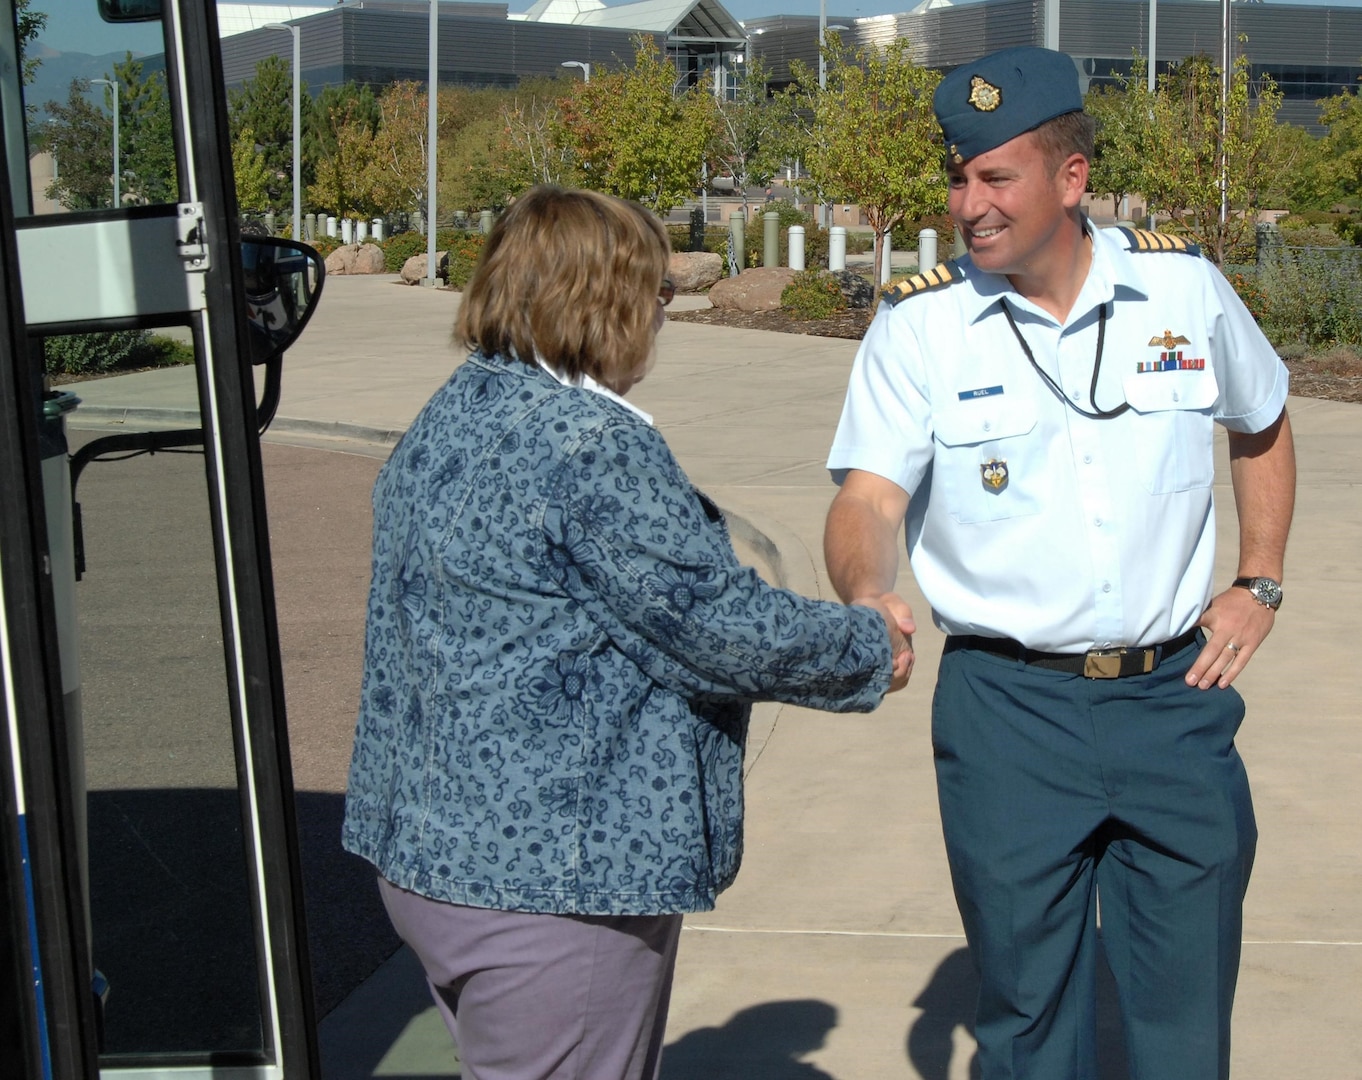 NSBA conference attendees visit NORAD, > U.S. Northern